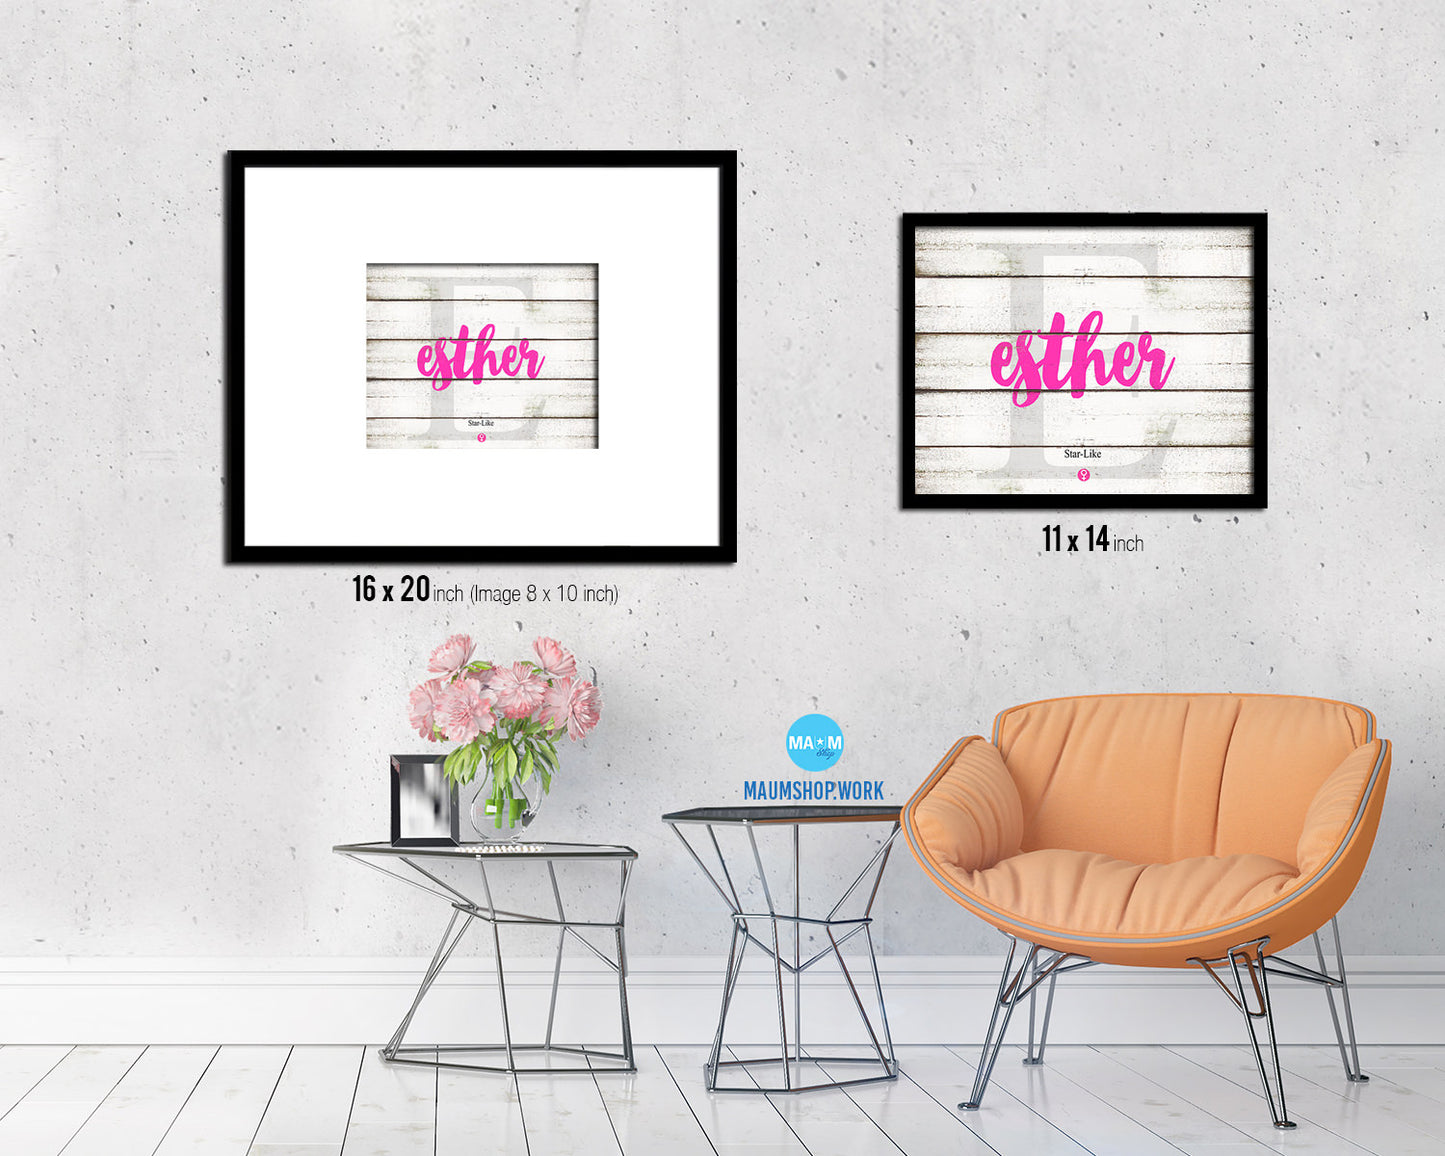 Esther Personalized Biblical Name Plate Art Framed Print Kids Baby Room Wall Decor Gifts